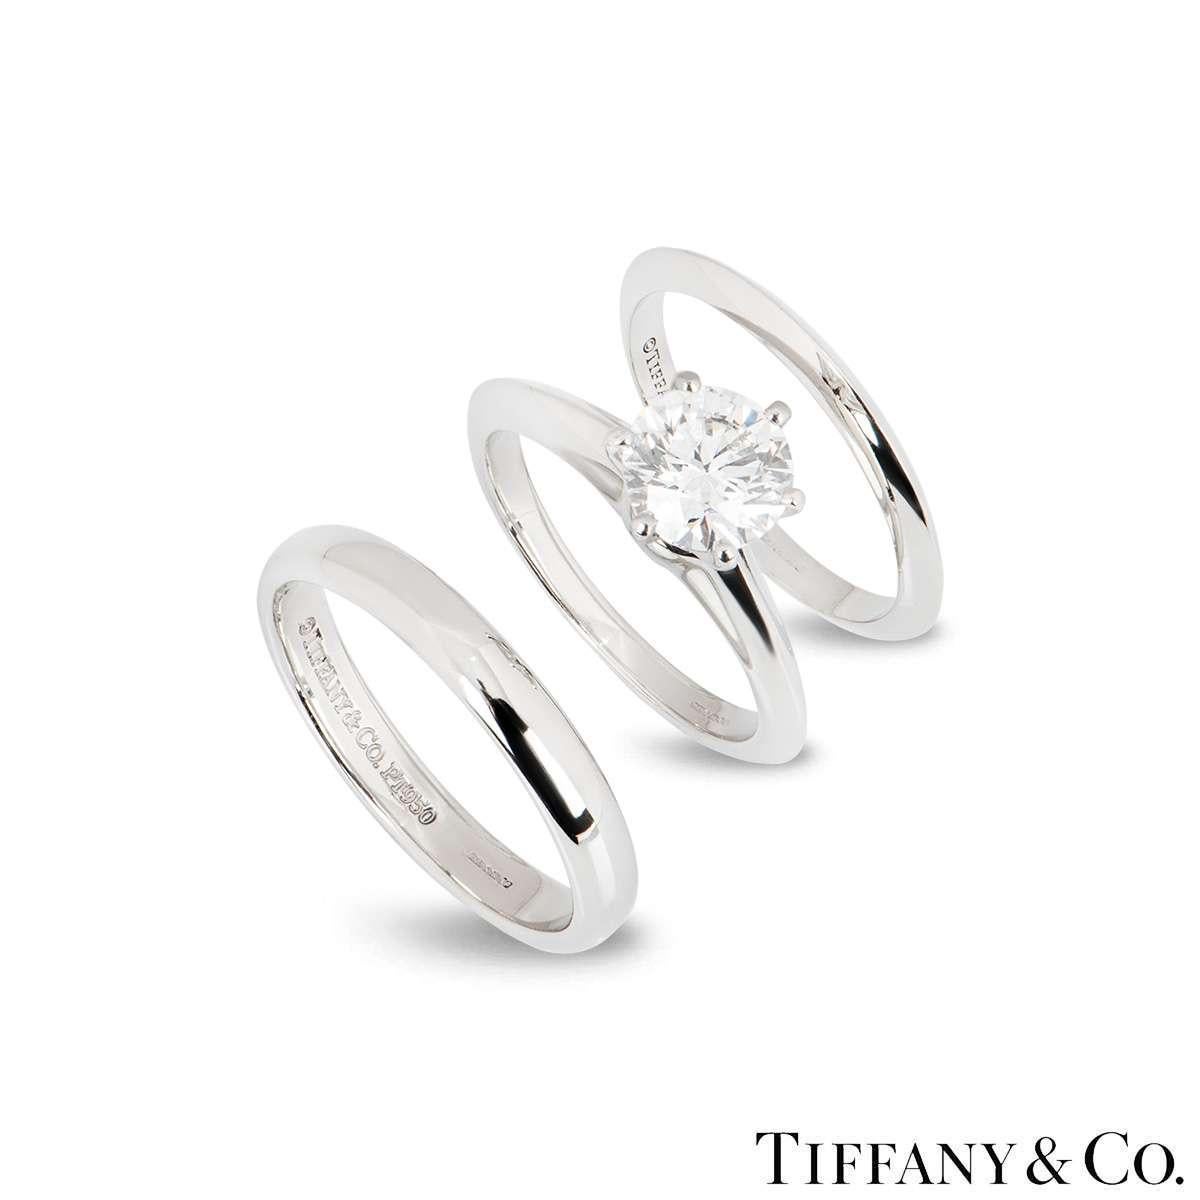 A beautiful platinum diamond bridal set by Tiffany & Co. The set consists of a diamond engagement ring and two polished bands. The diamond ring is set with a 1.21ct round brilliant cut diamond, H colour, VS1 clarity and is a size K (UK), US 5 1/8, .